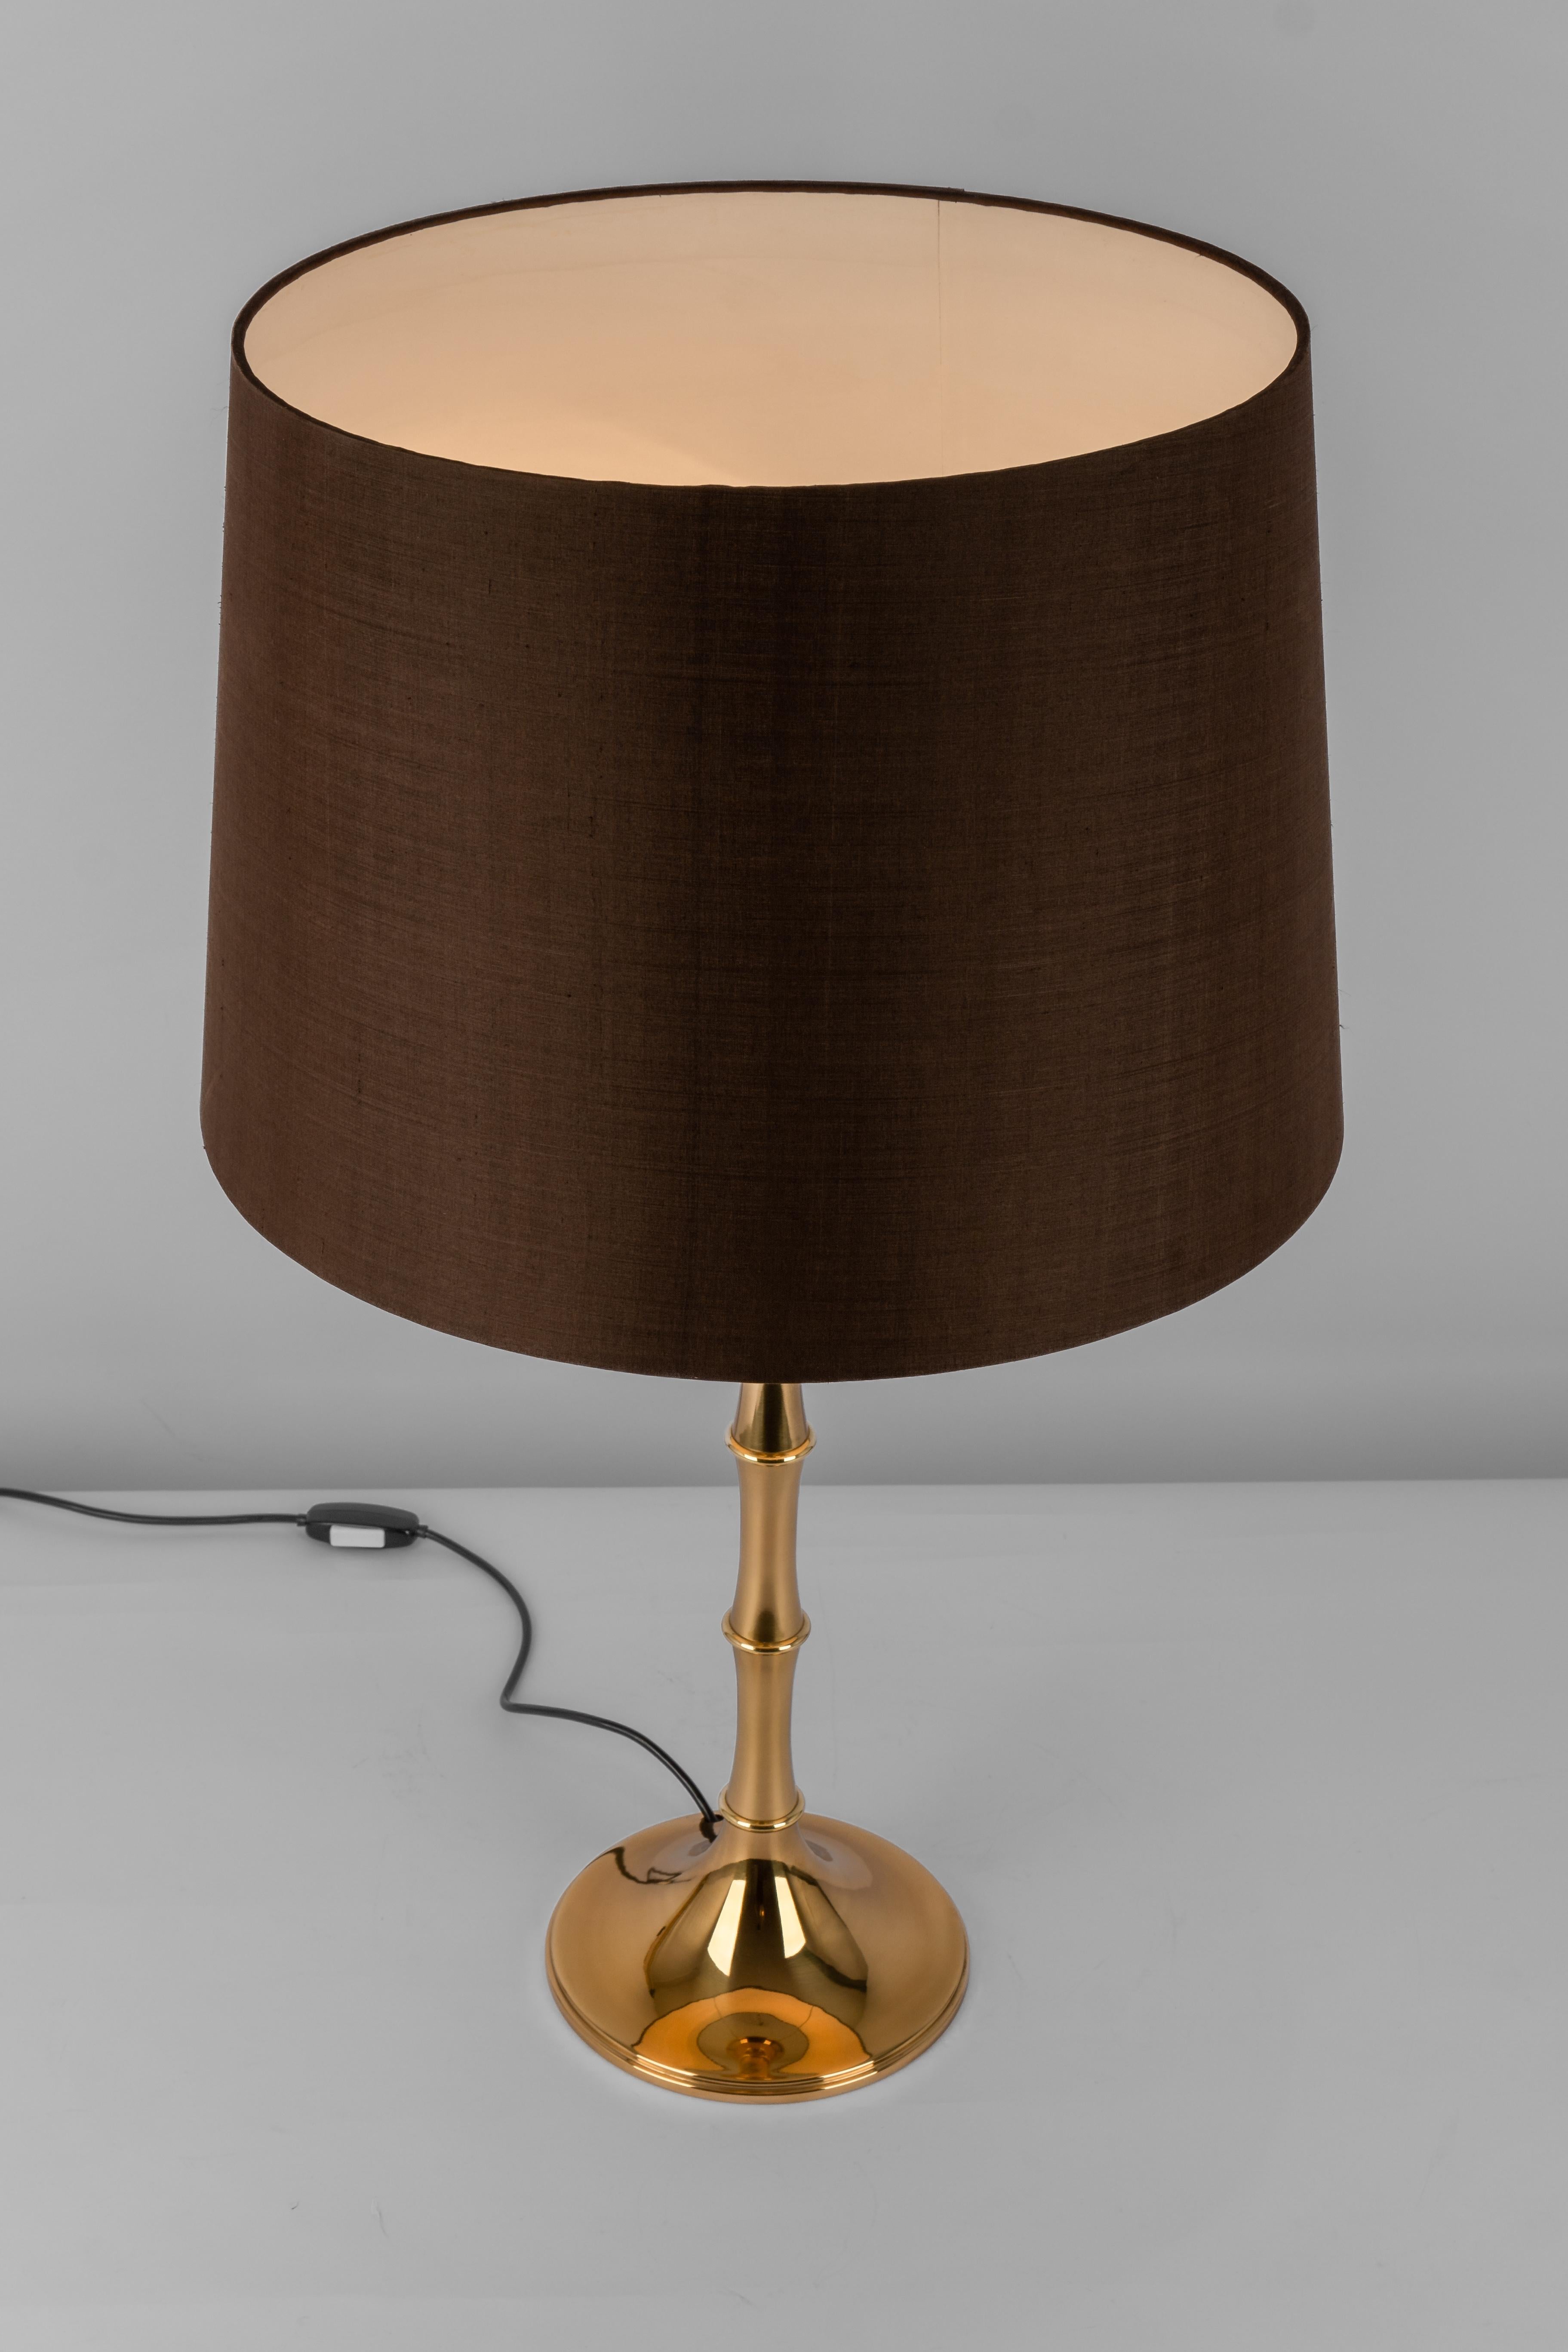 Pair of Bamboo Table Lamps by Ingo Maurer, Germany, 1970s For Sale 4